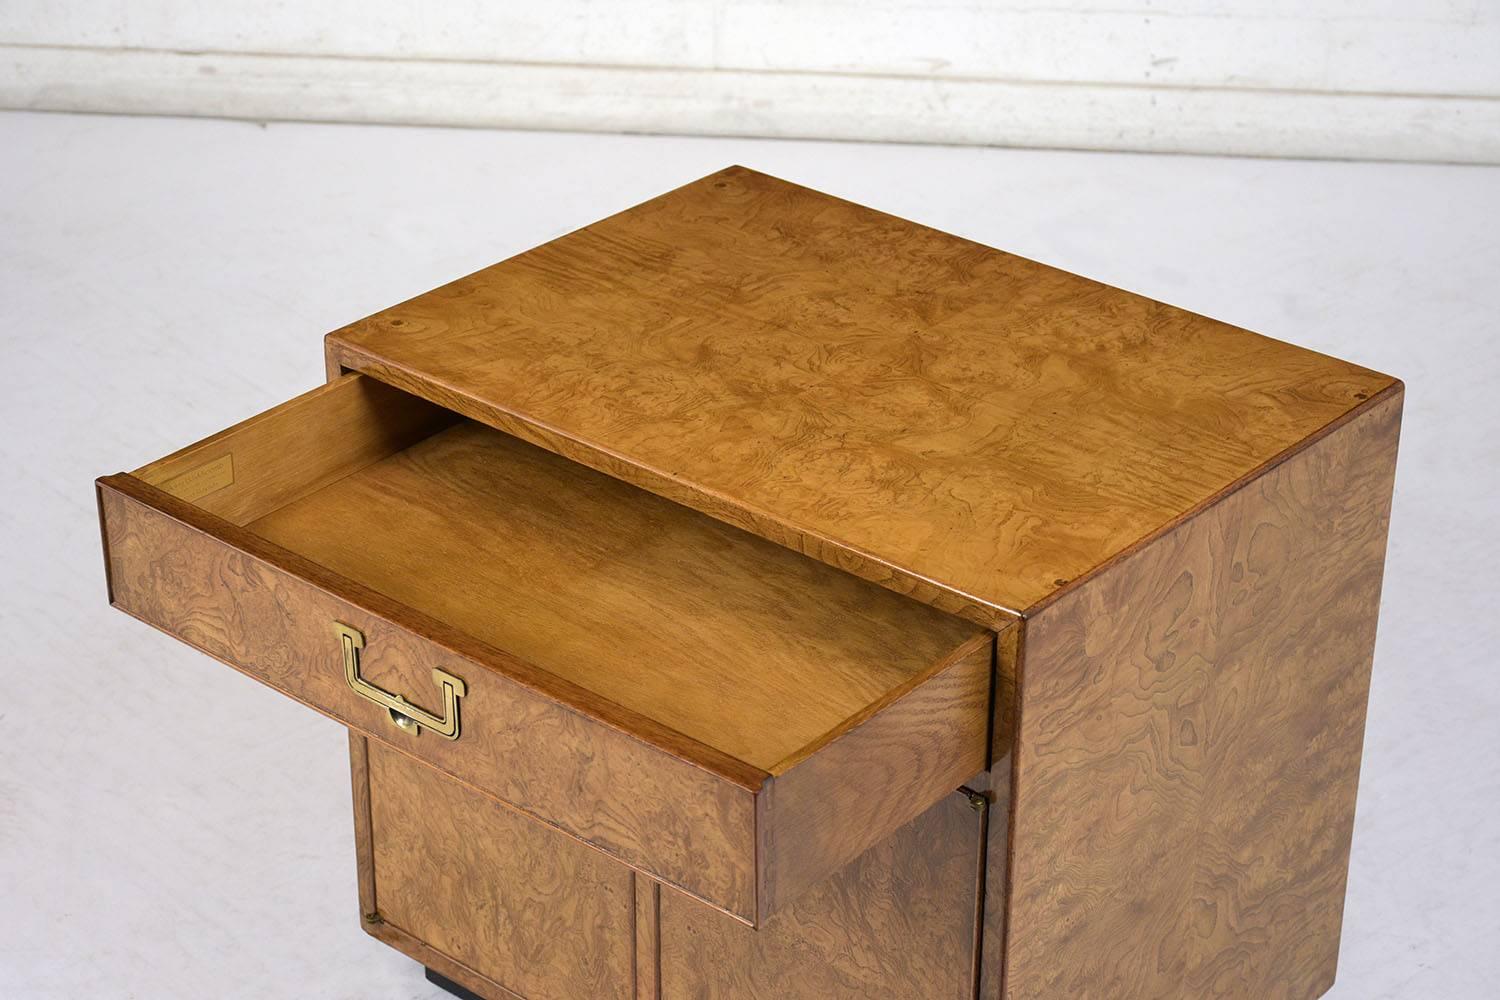 This pair of 1960s Campaign-style nightstands are made by John Widdicomb. The nightstands are adorned with burled wood veneers finished in a walnut color with black square feet. There is a single drawer and a two door cabinet below for ample storage